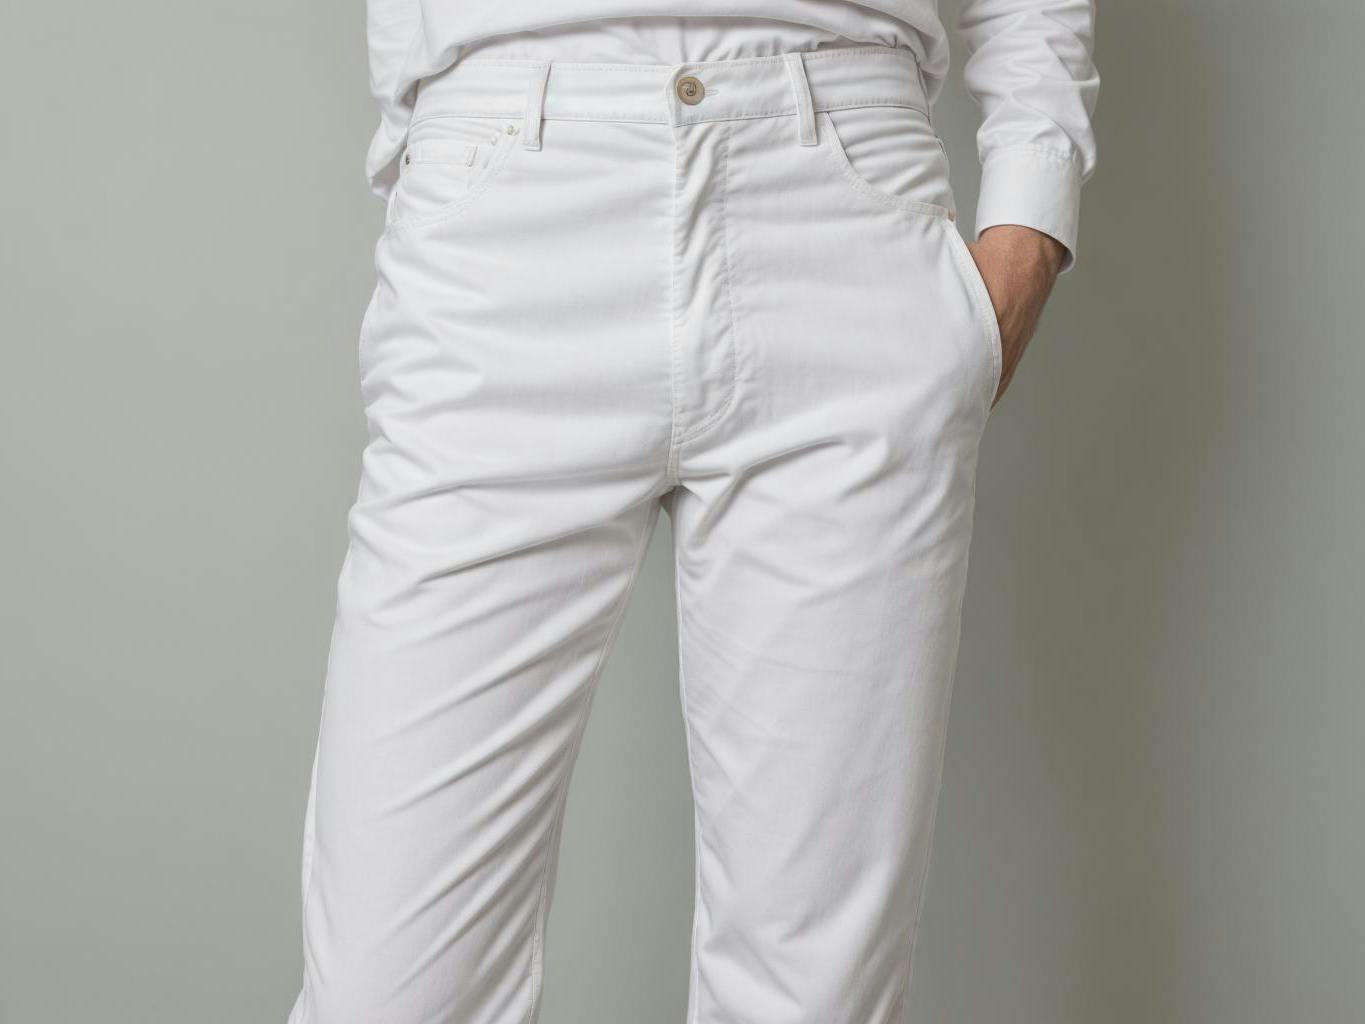 Front view of a man wearing white pants